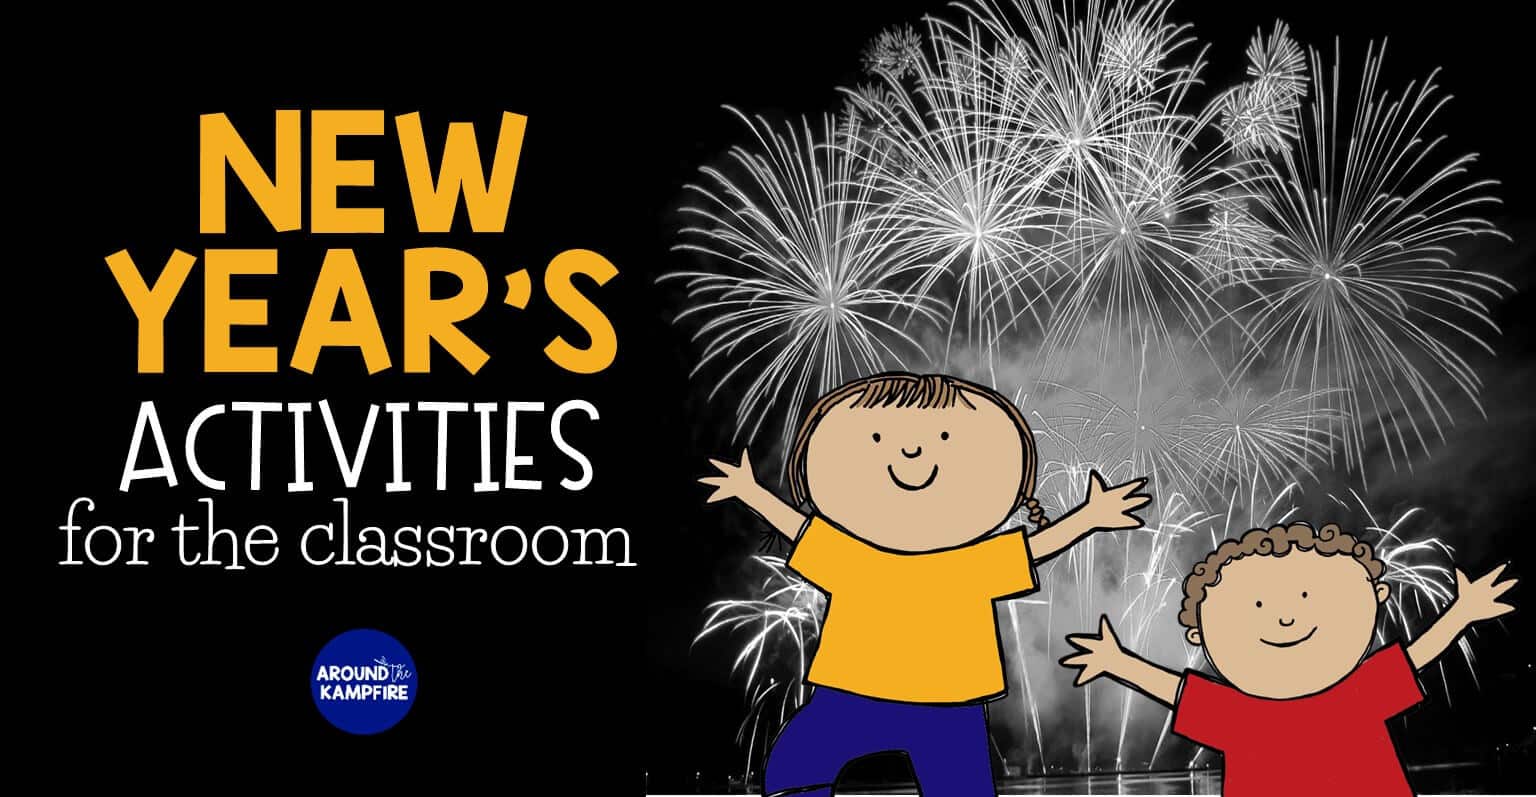 5 Fun New Year's Activities for the Classroom - Around the Kampfire